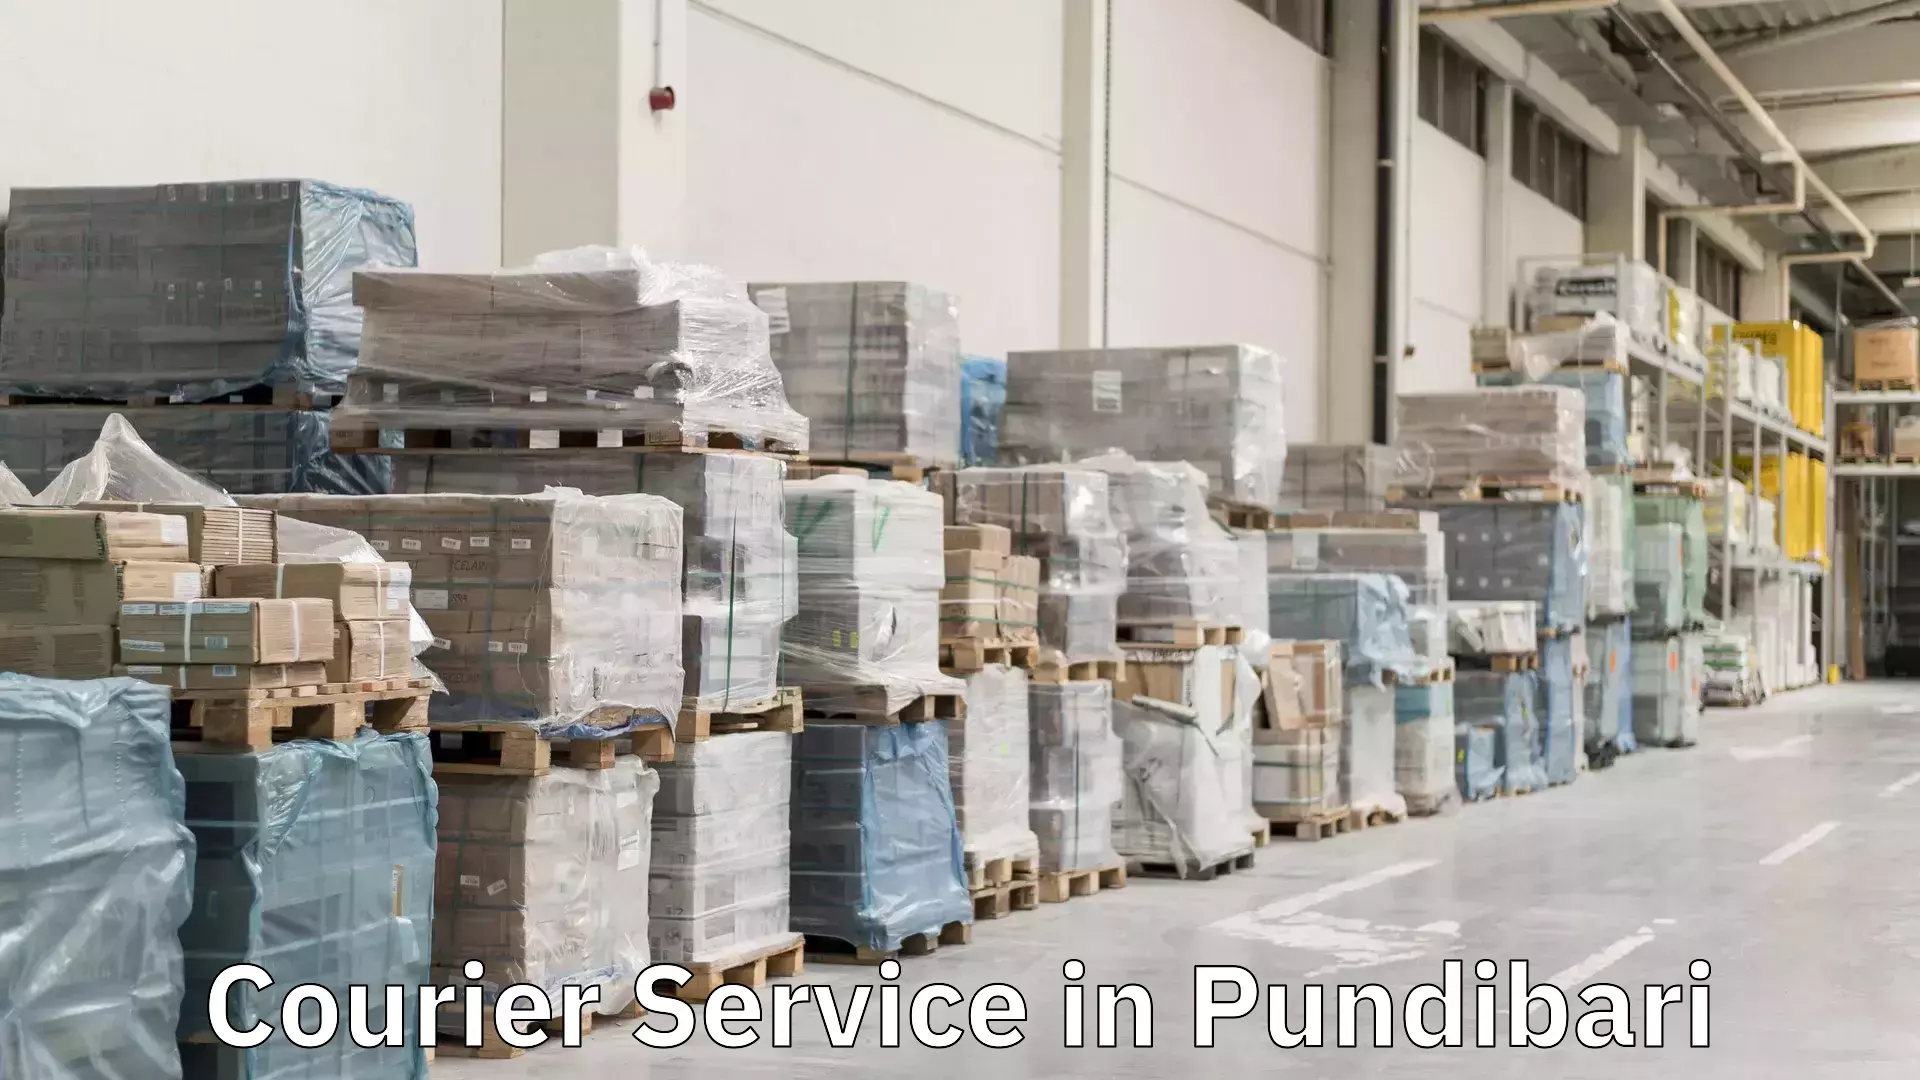 State-of-the-art courier technology in Pundibari